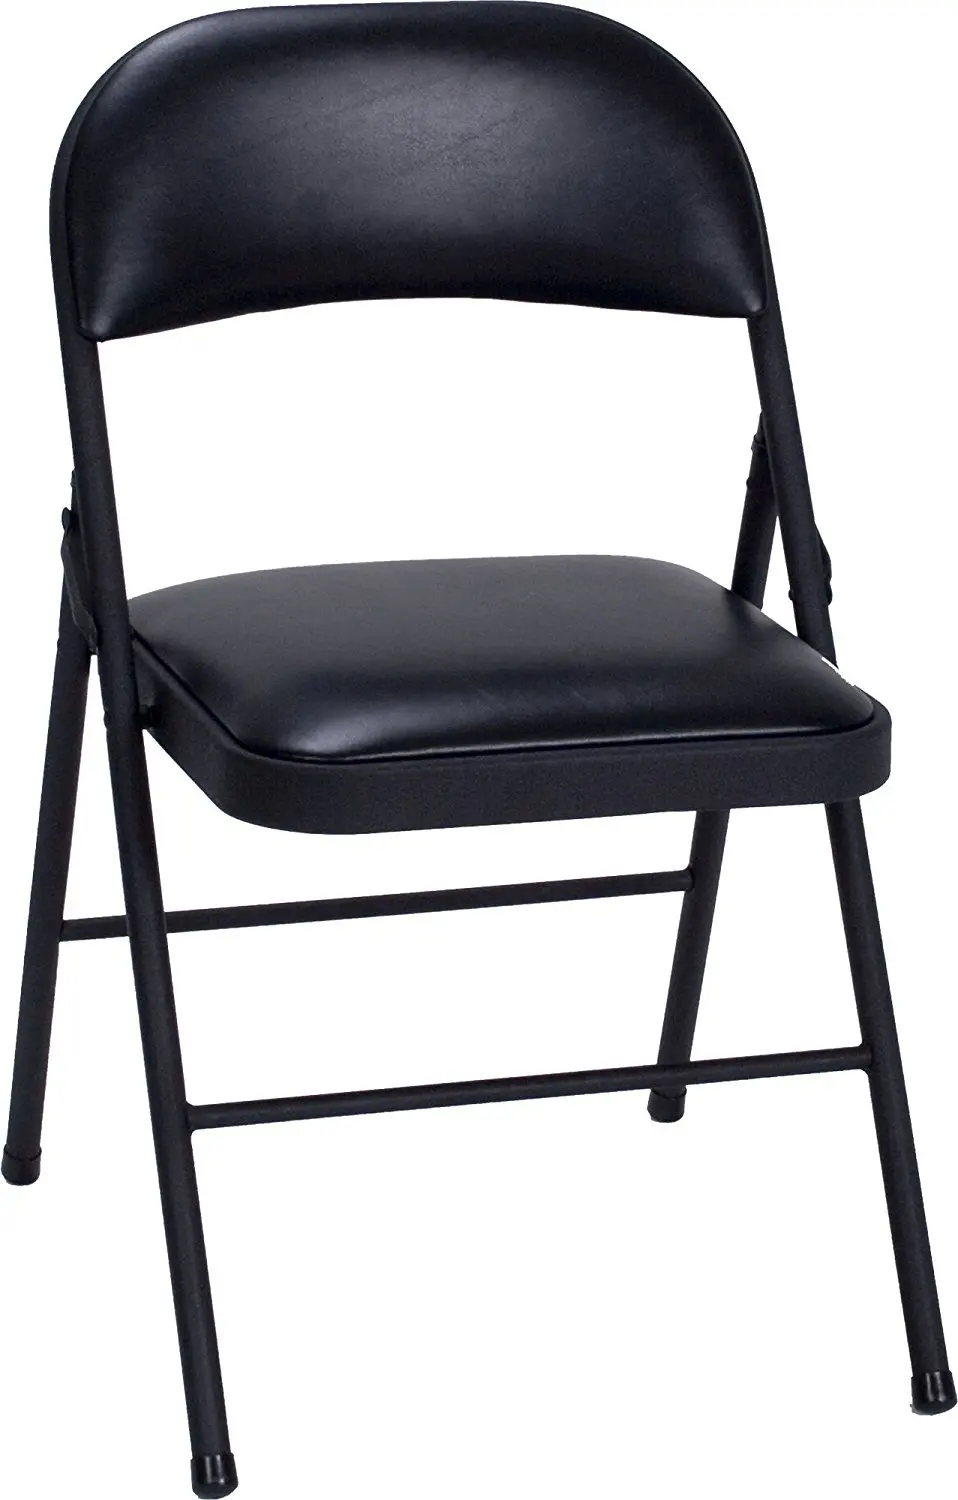 Cheap Full Metal Folding Chair Used Folding Chairs For Sale - Buy Used